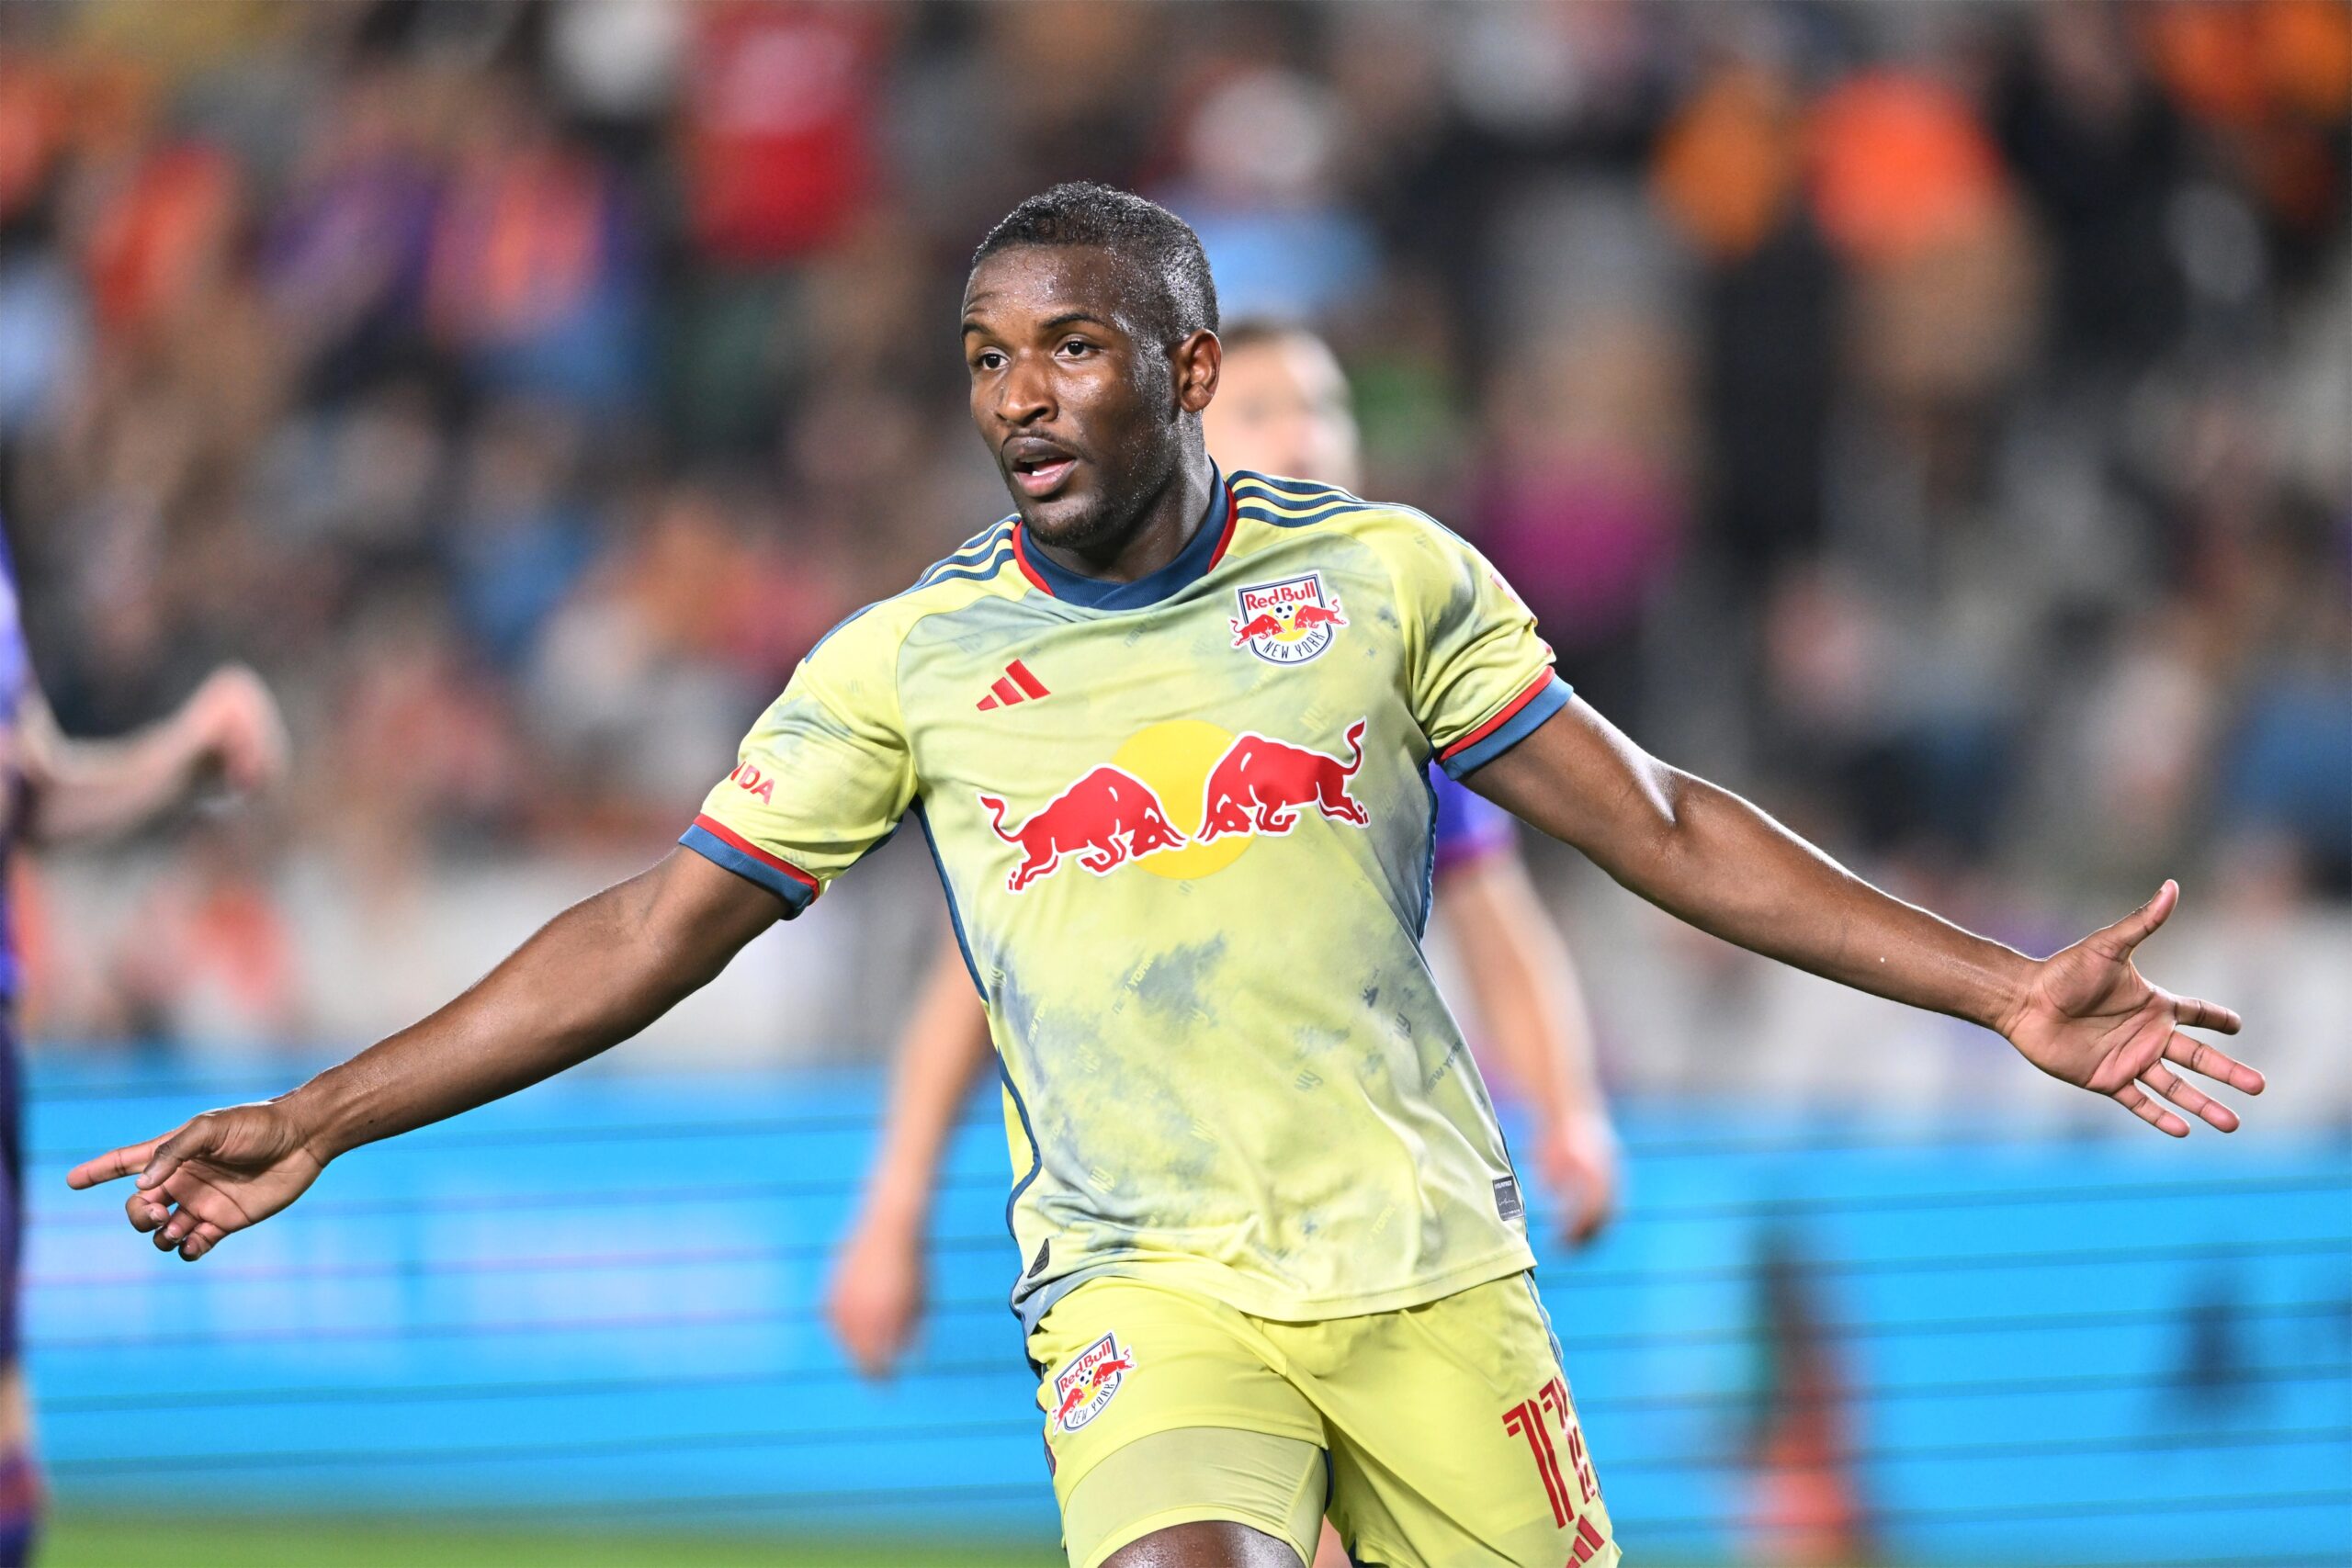 Elias Manoel Plays a Big Role in the Red Bulls First Win in MLS This Year